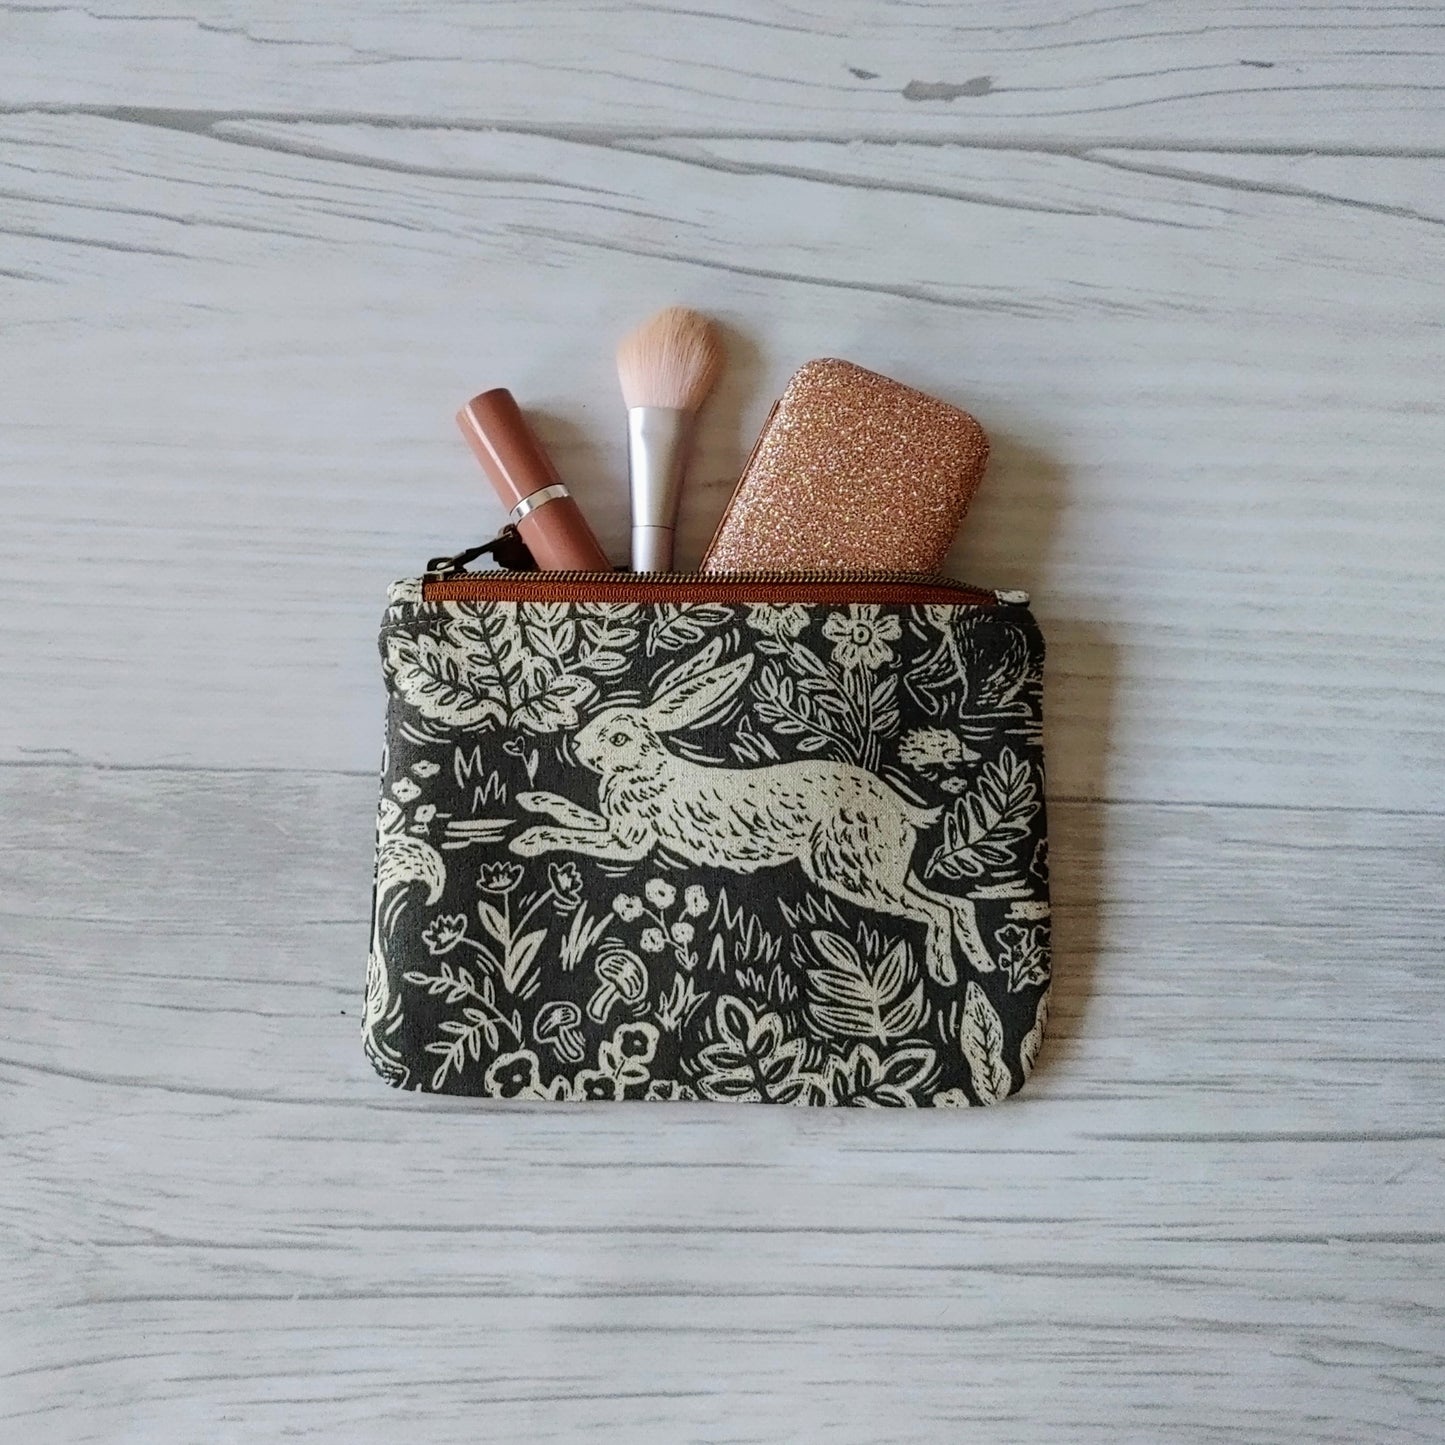 Passport Pouch in Fable Hare by Rifle Paper Co print. From Plumage Studio Accessories